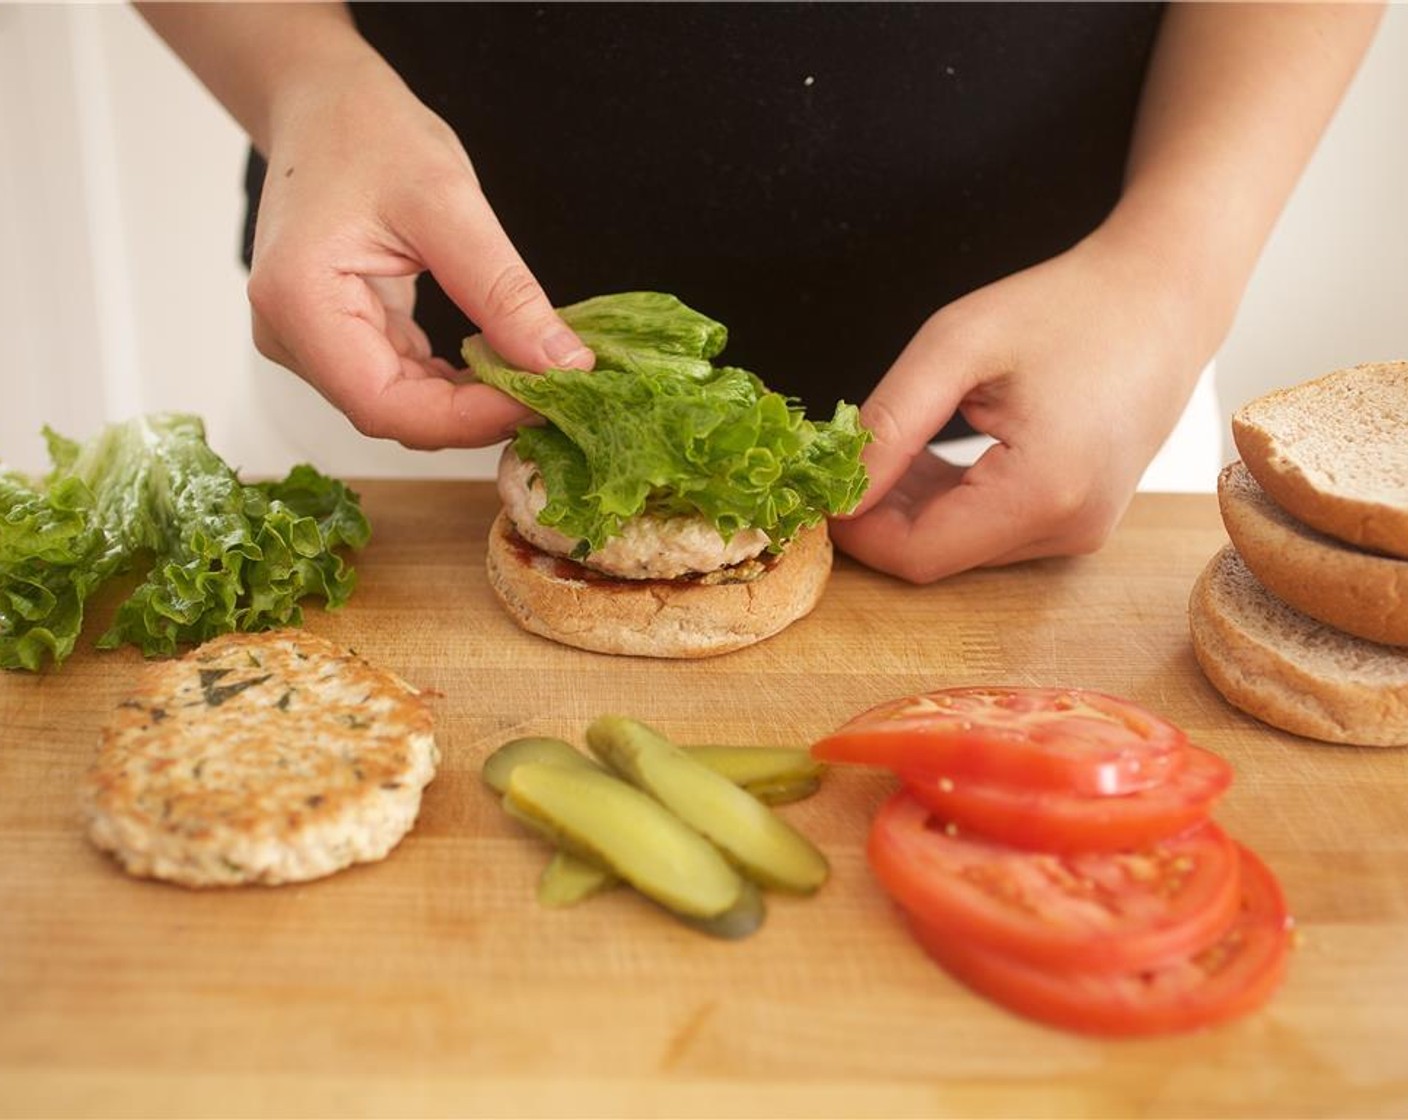 step 11 Spread one tablespoon of Ketchup (1/3 cup) and Dijon Mustard (2 Tbsp) on each bottom bun. Add the turkey patties and top each with an Escarole Lettuce (2 pieces) leaf, tomatoes, and Dill Pickles (2). Place the top bun on the burger.